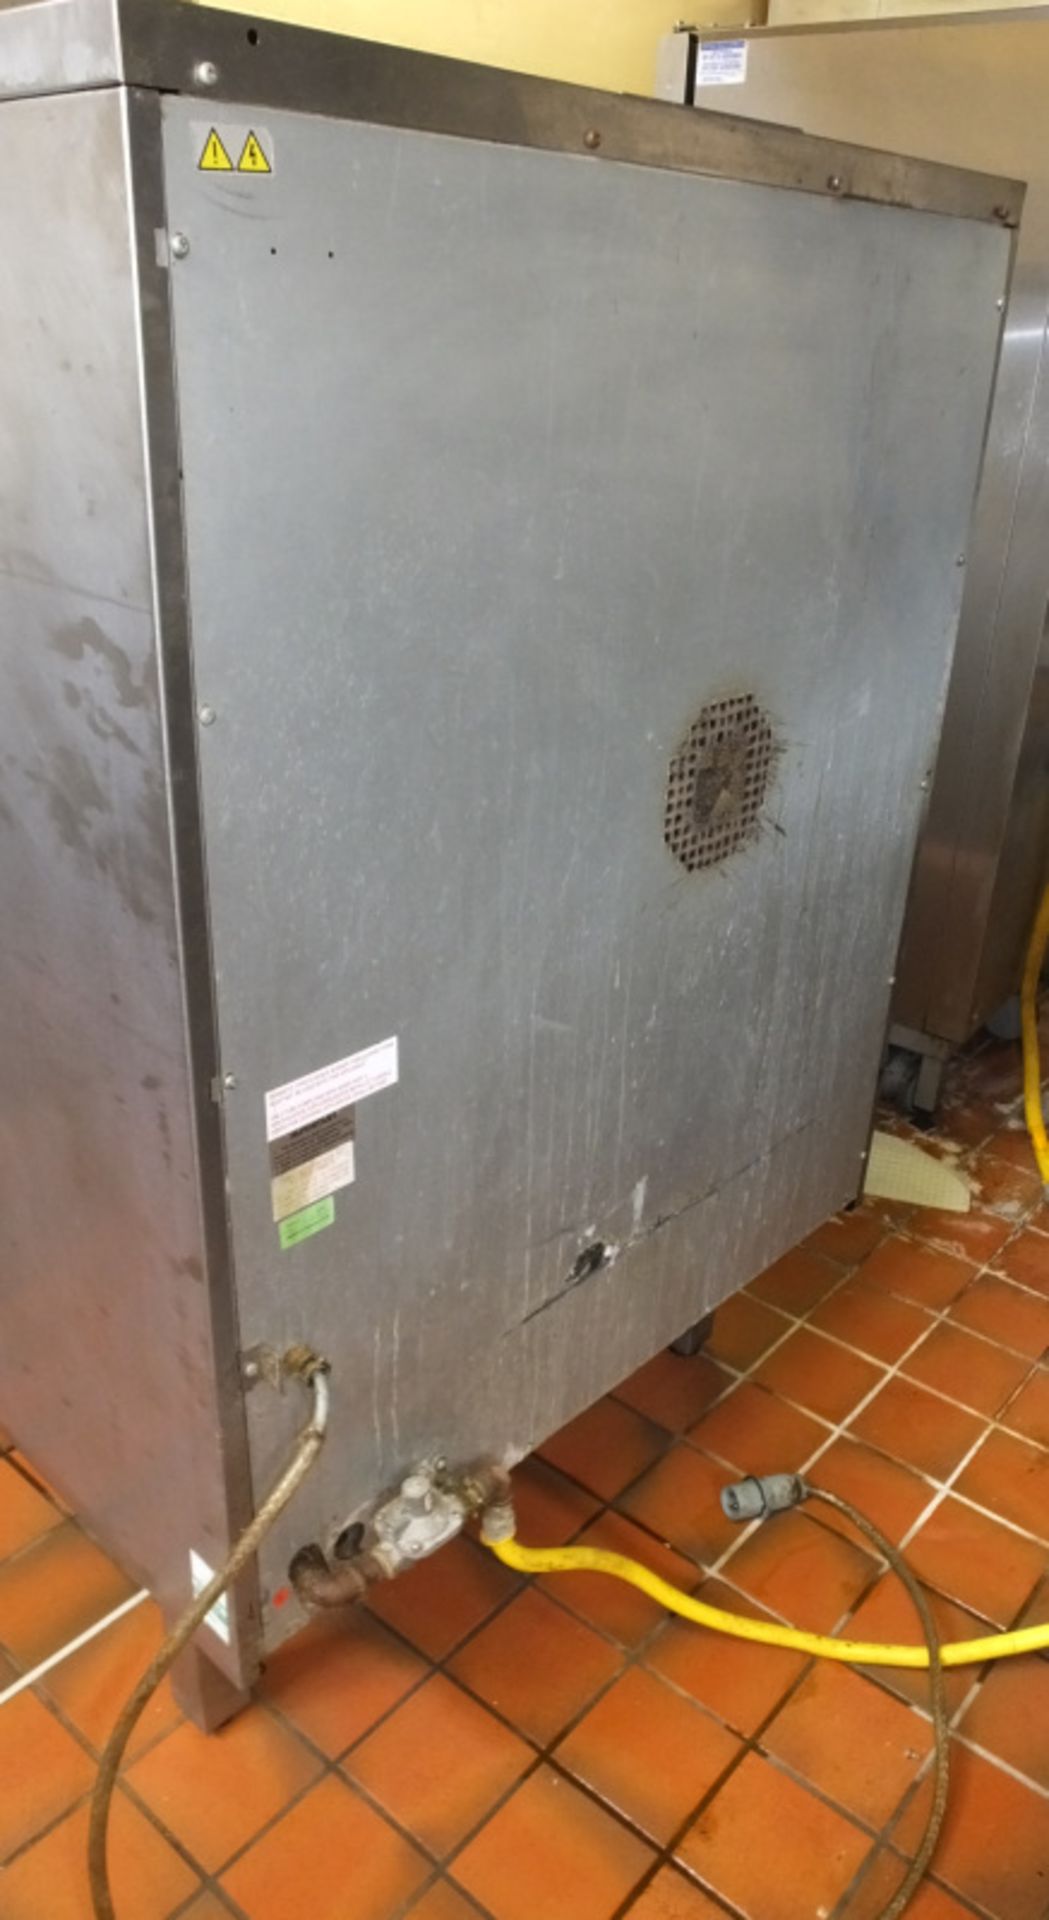 Falcon G7211 Convection Oven - Natural Gas - Single Phase - 240v - Serial No. F440532 - Image 6 of 6